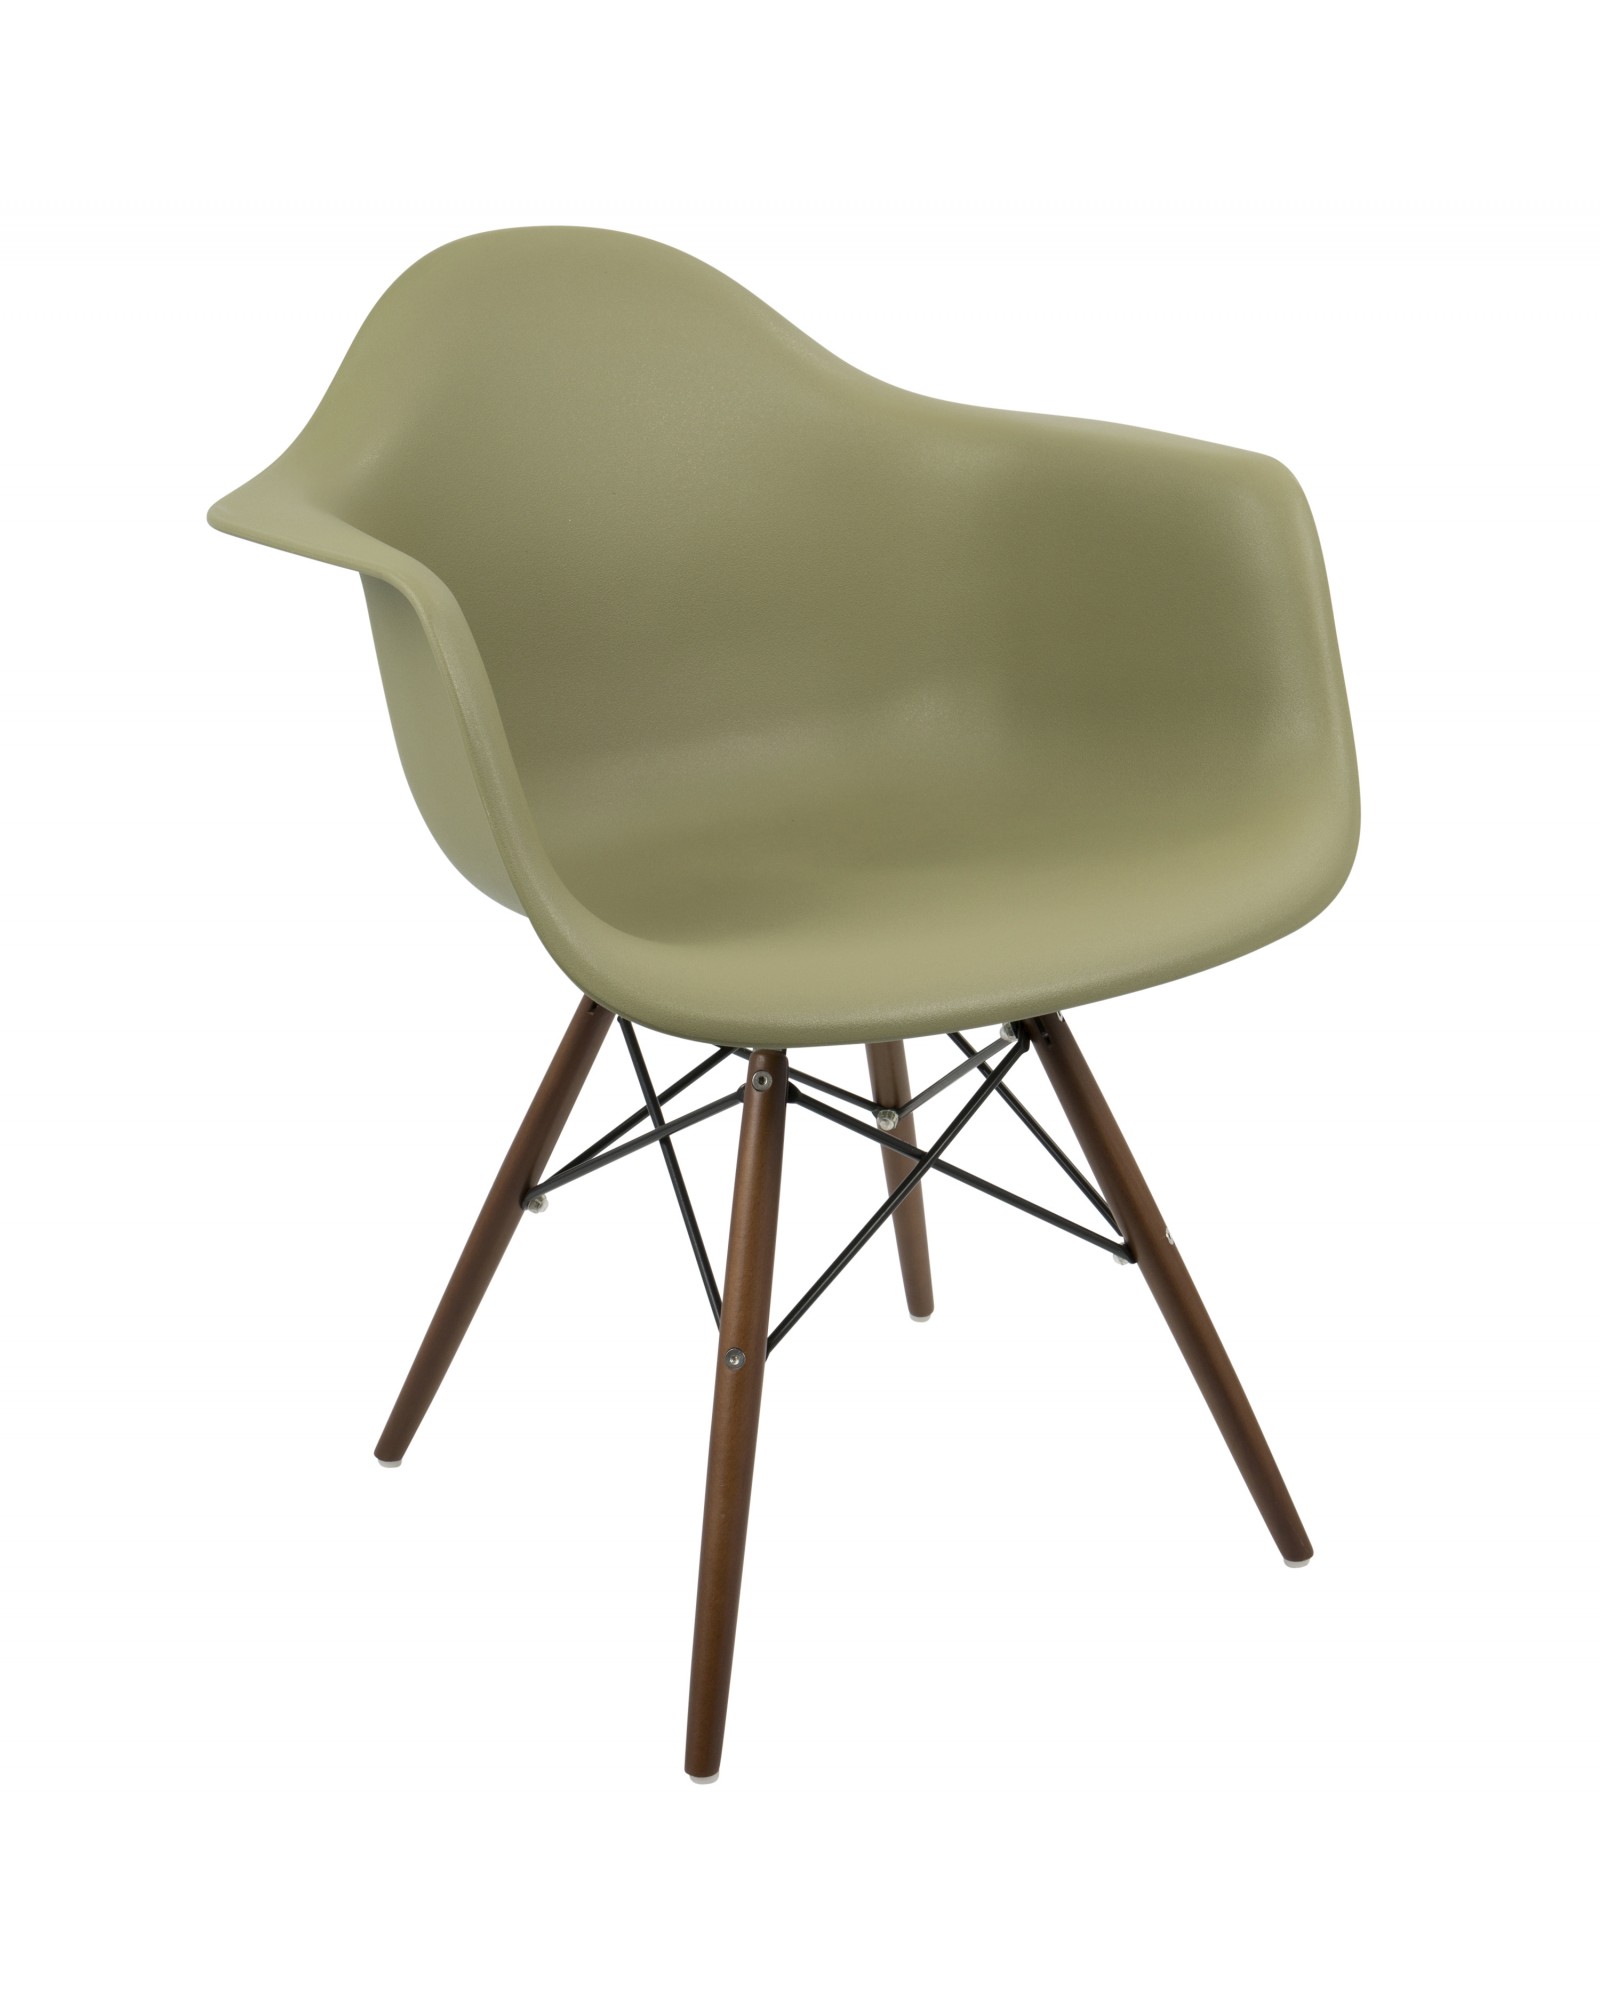 Neo Flair Mid-Century Modern Chair in Olive and Espresso - Set of 2